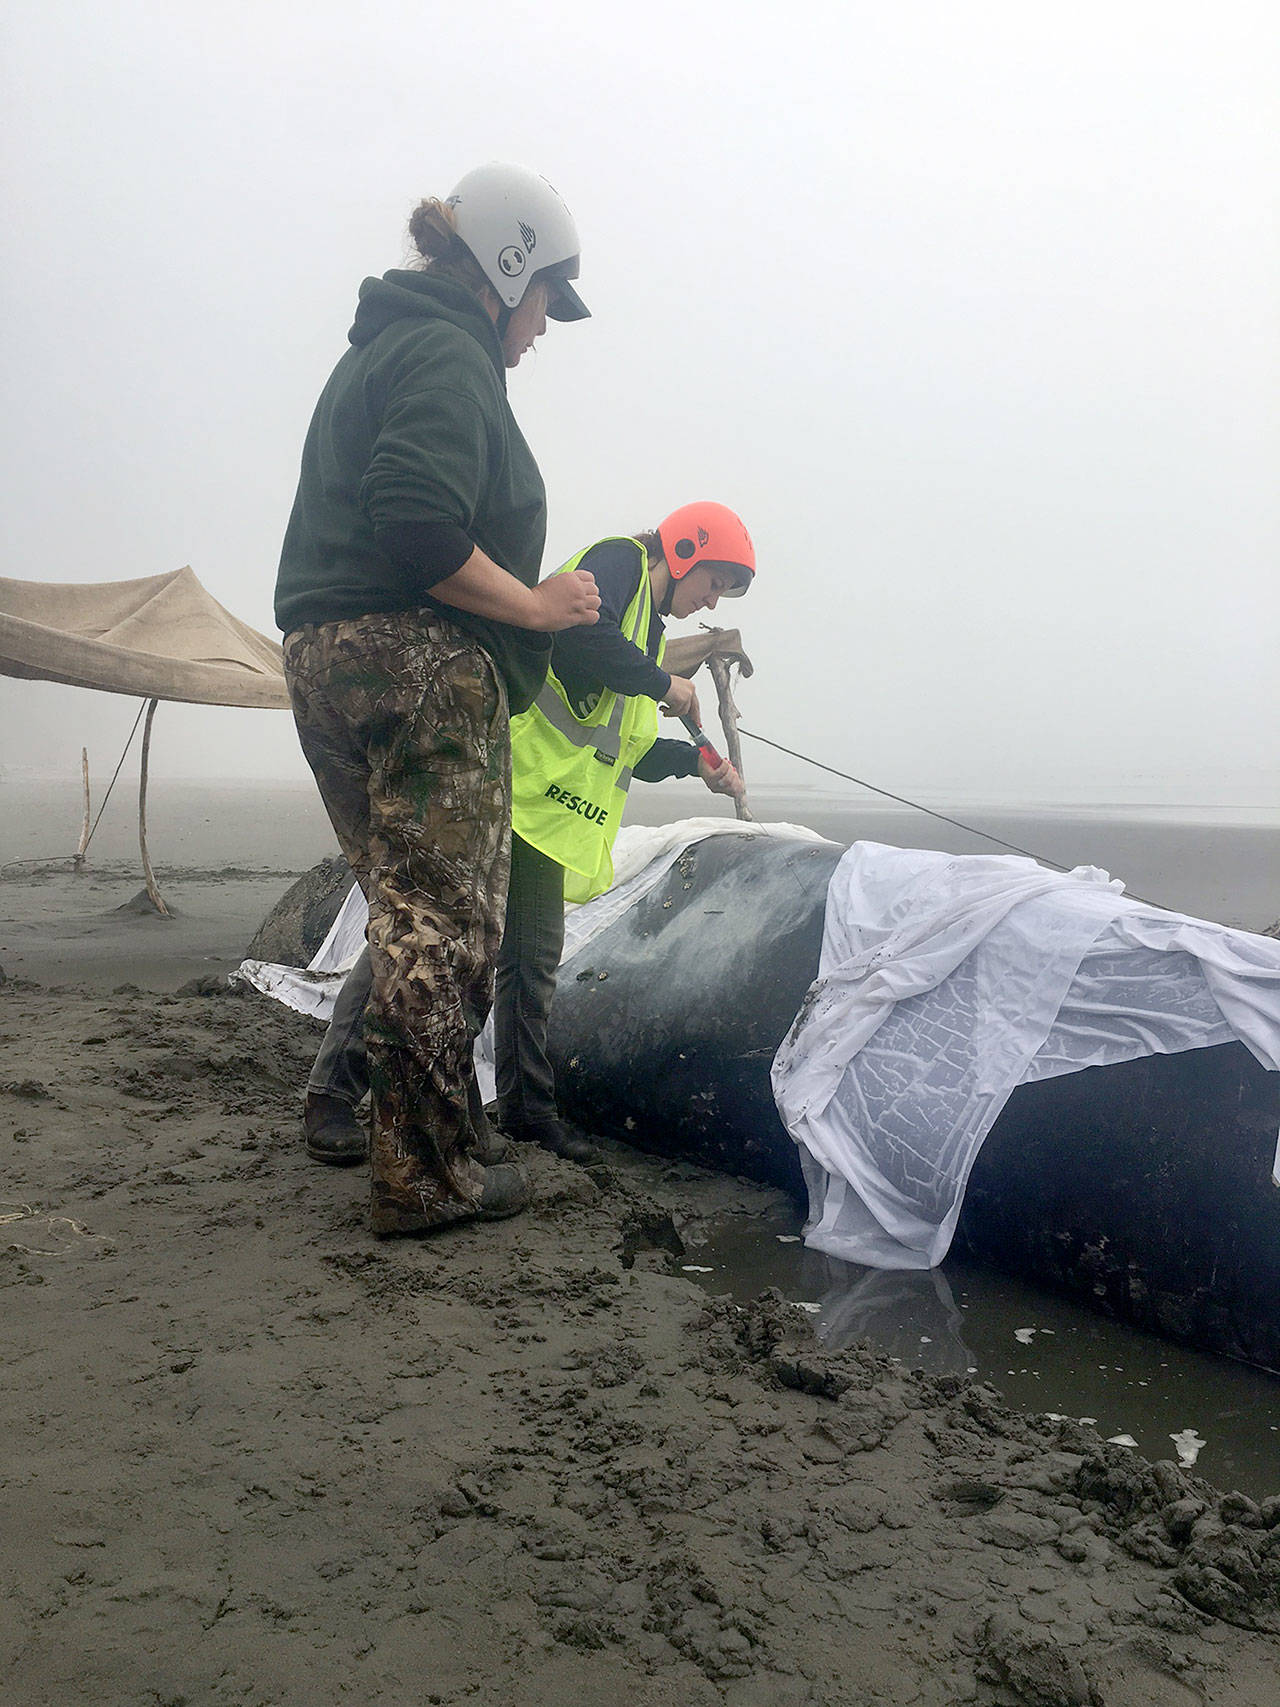 A rescue effort during high tide late Friday night freed a young gray whale that had been stranded on a remote beach in Olympic National Park and the Olympic Coast National Marine Sanctuary for about three days. (Sealife Response Rehab Research)